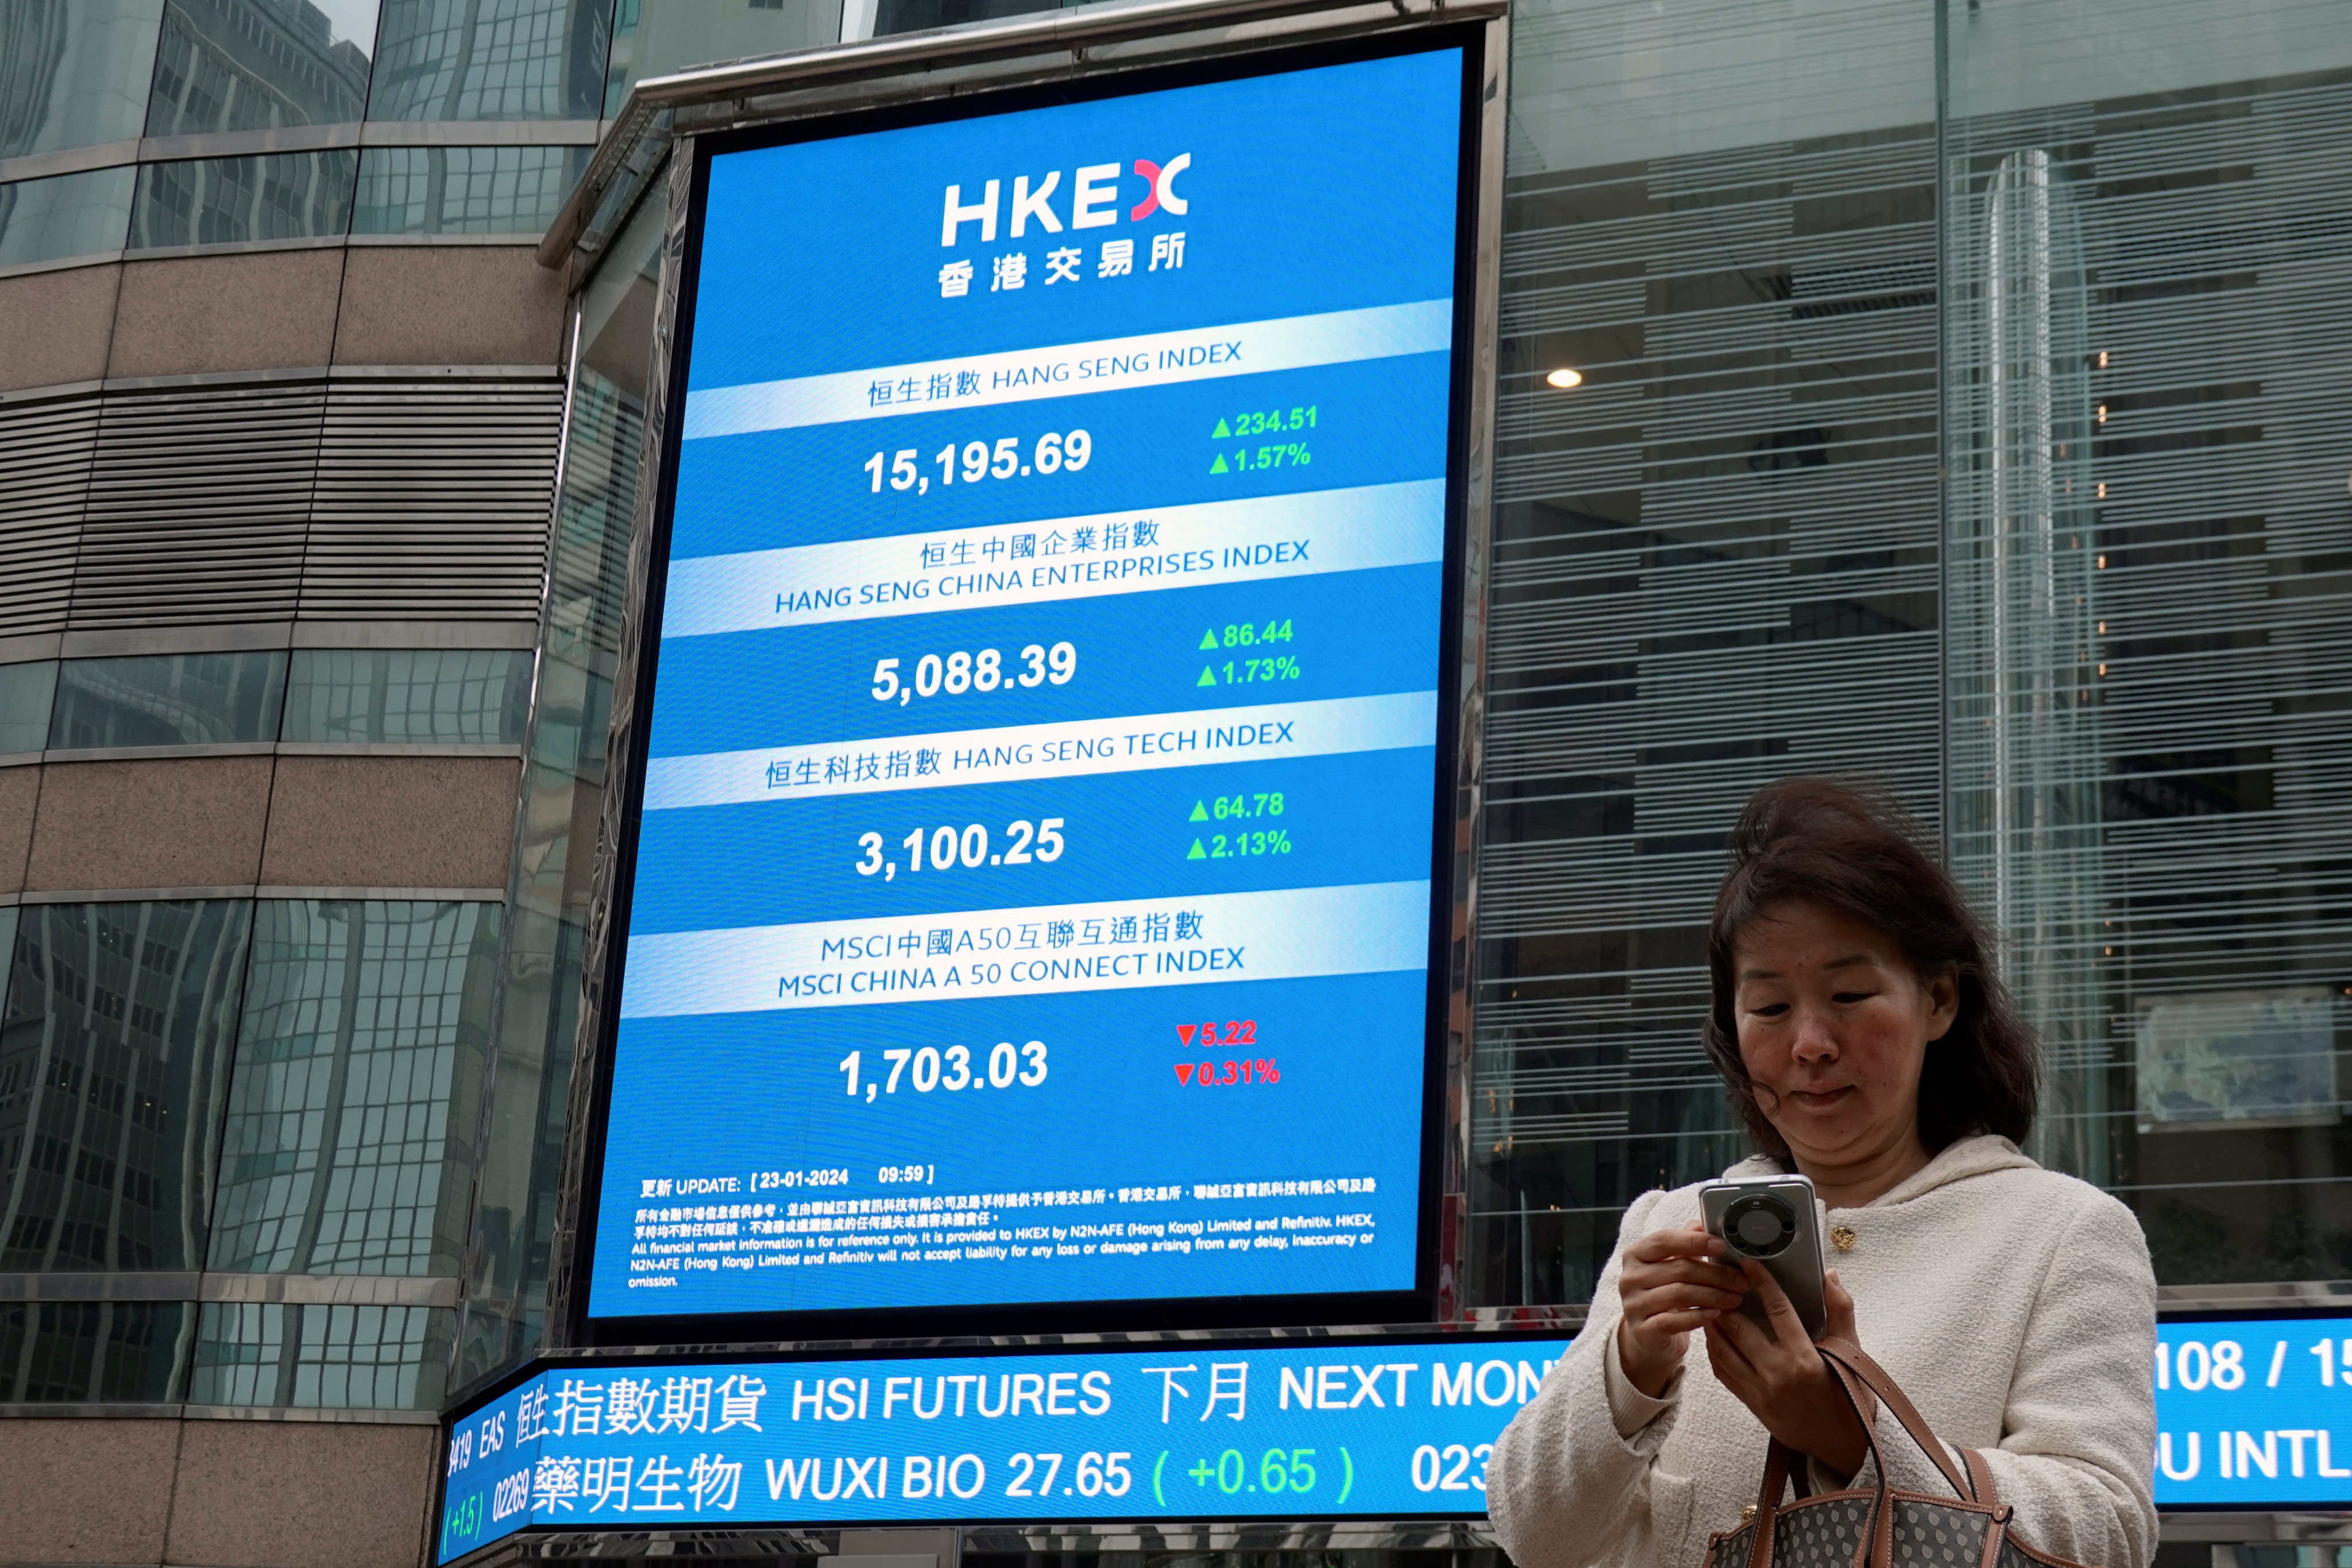 A woman checks her mobile phone near a screen displaying the Hang Seng stock index and stock prices in Hong Kong. Photo: Reuters